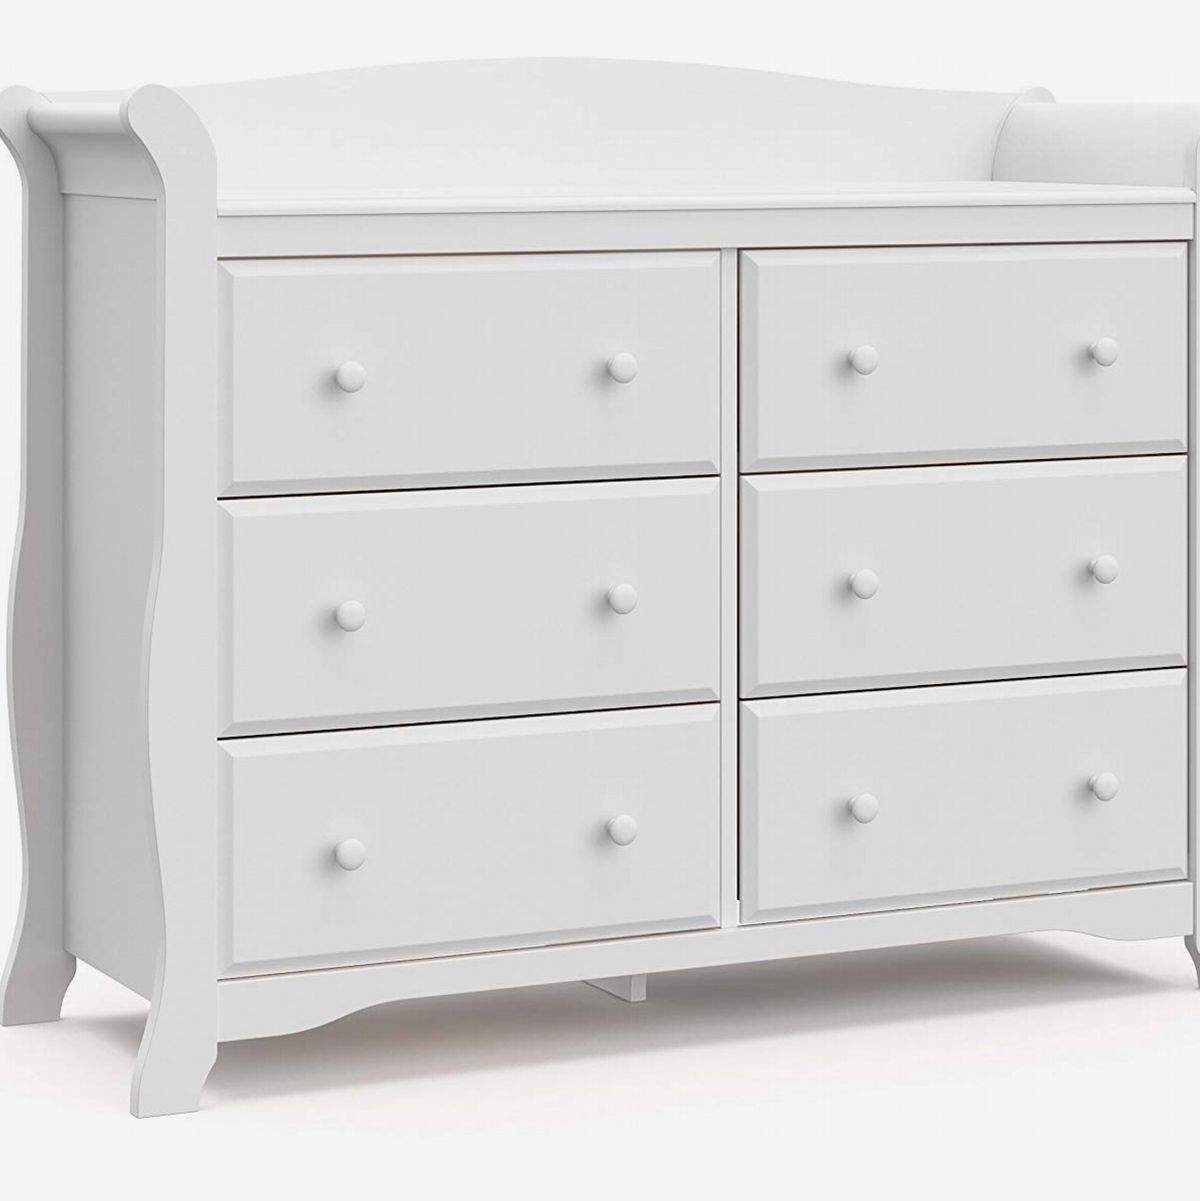 7 Best Changing Tables 2019 The, Changing Station Dresser